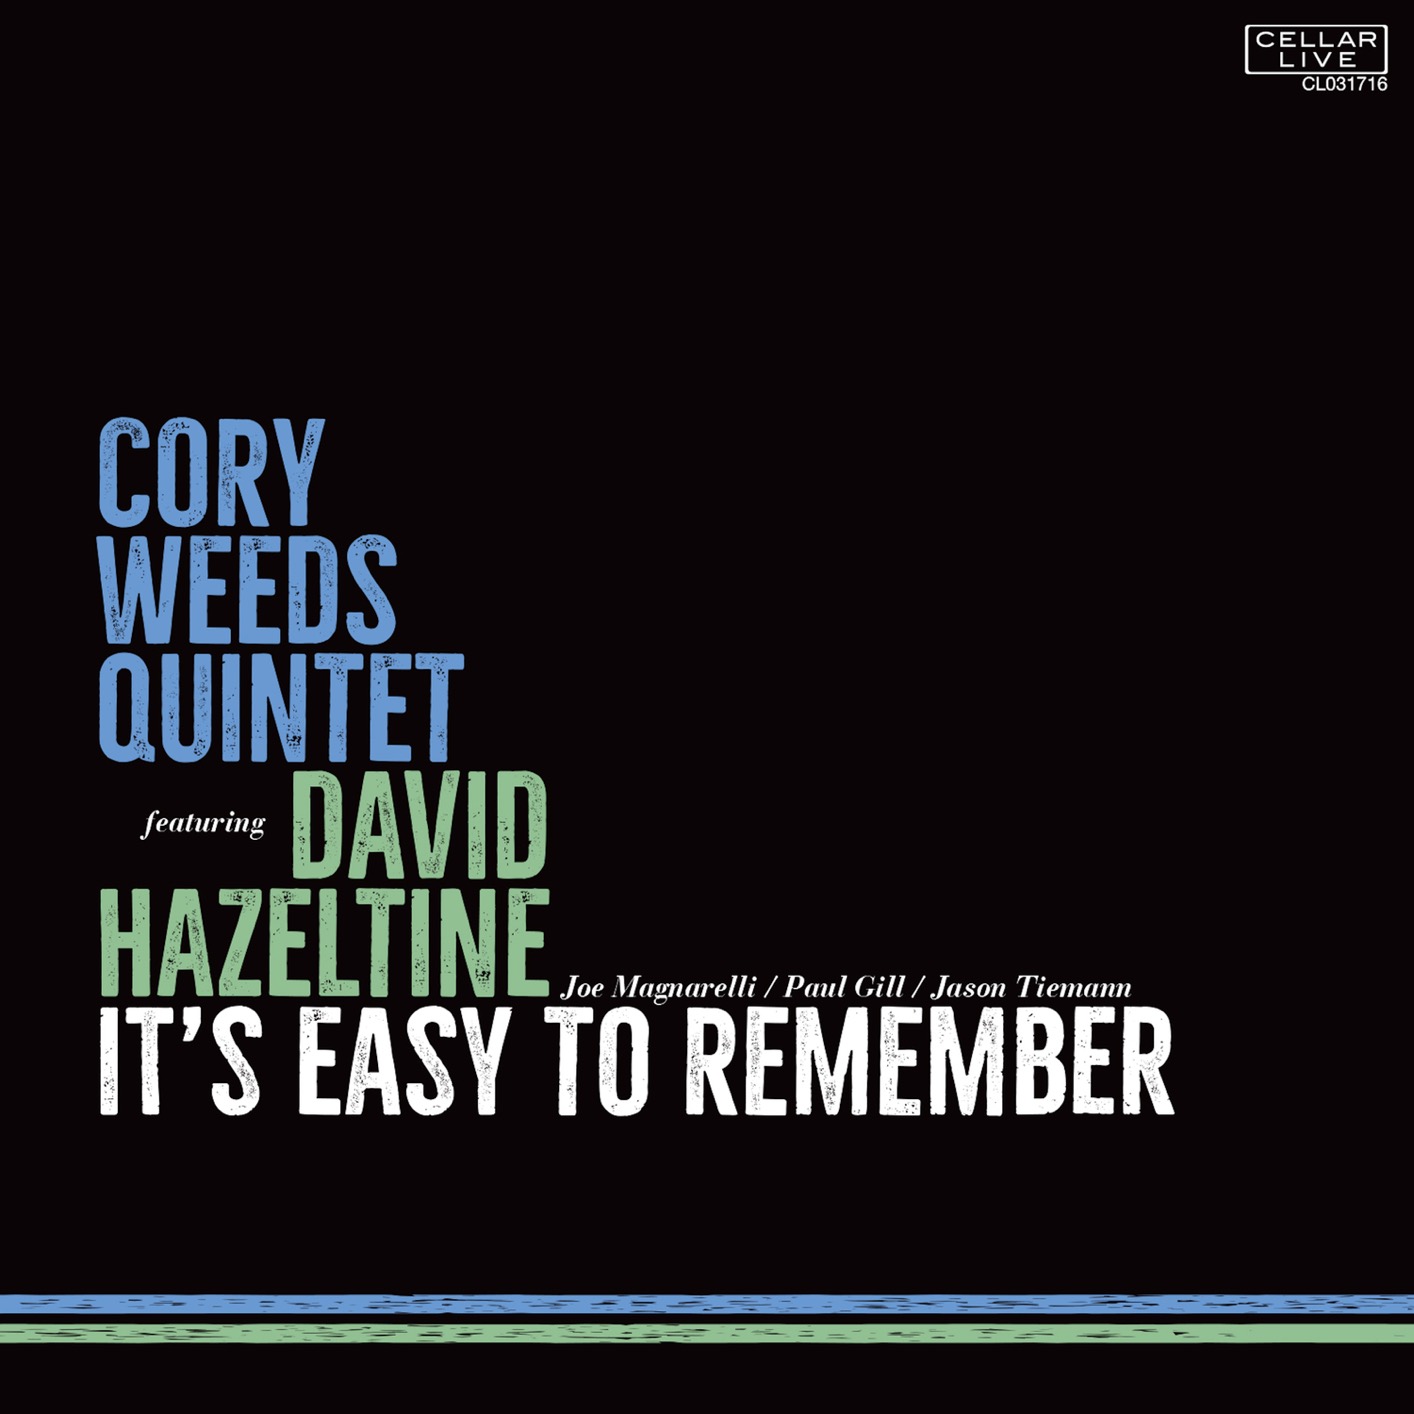 Cory Weeds Quintet – Its Easy to Remember (2016/2020) [FLAC 24bit/96kHz]